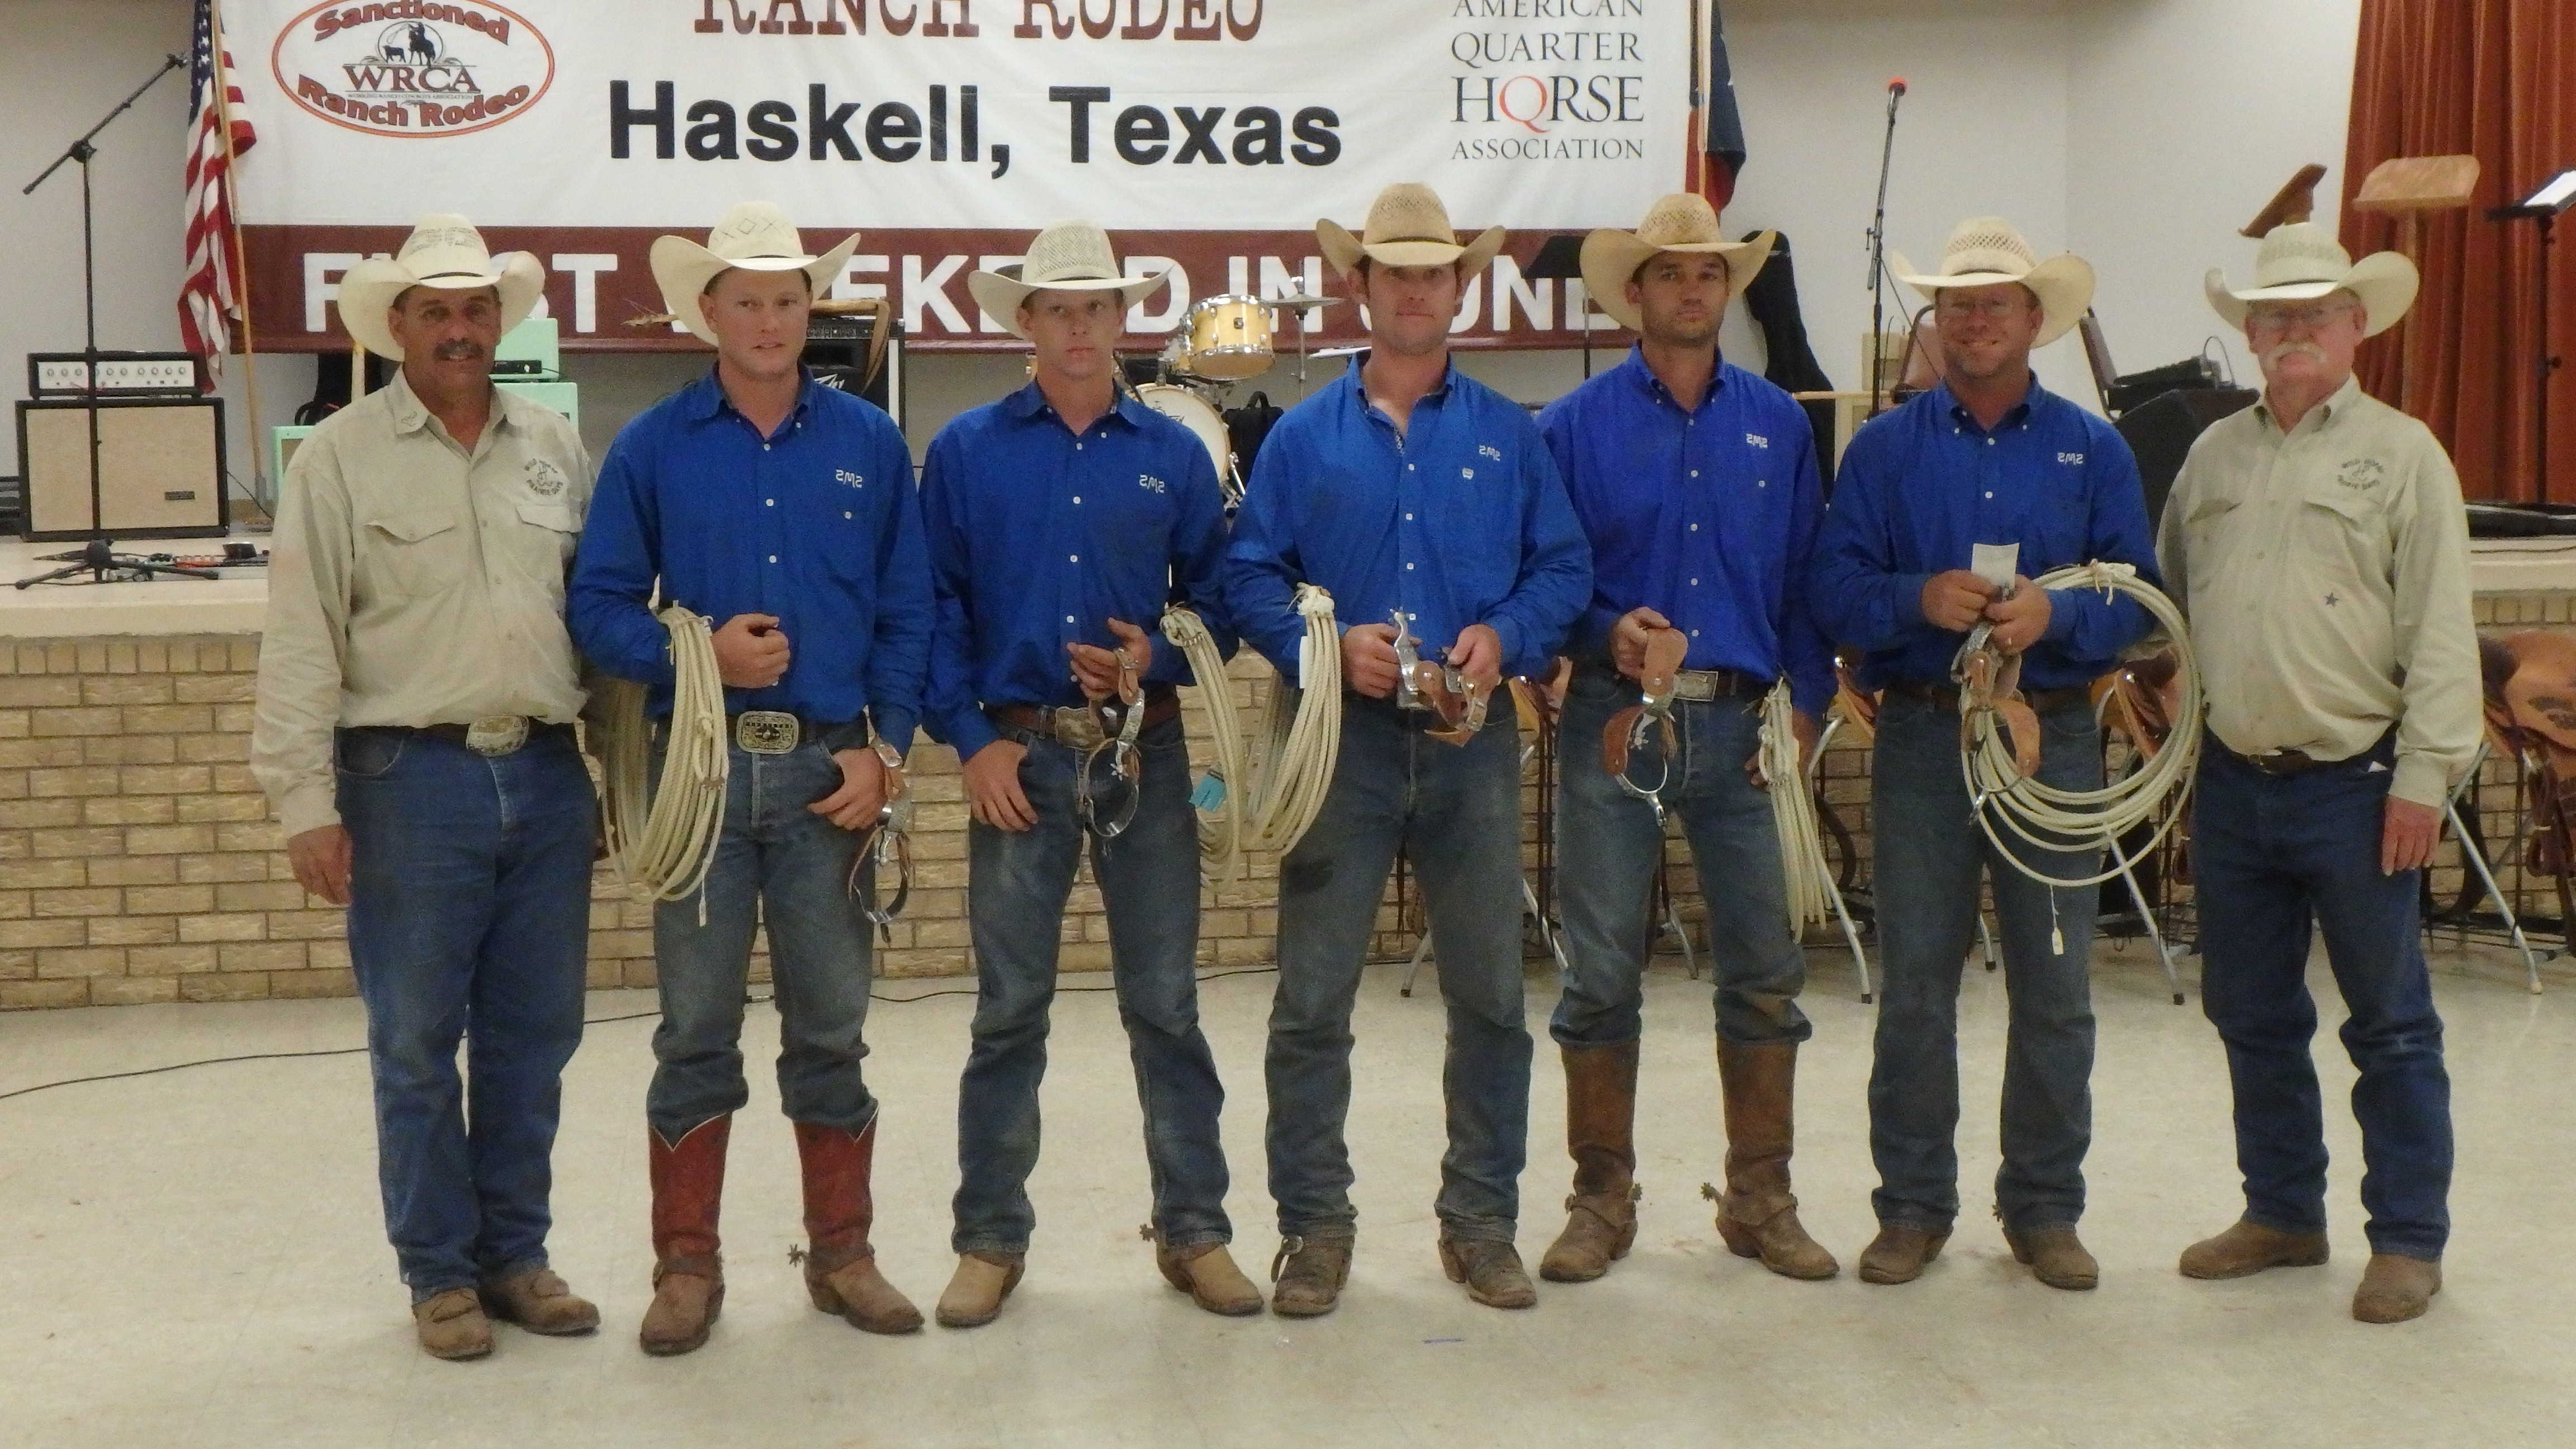 2nd Place Ranch Team – Swenson Land & Cattle